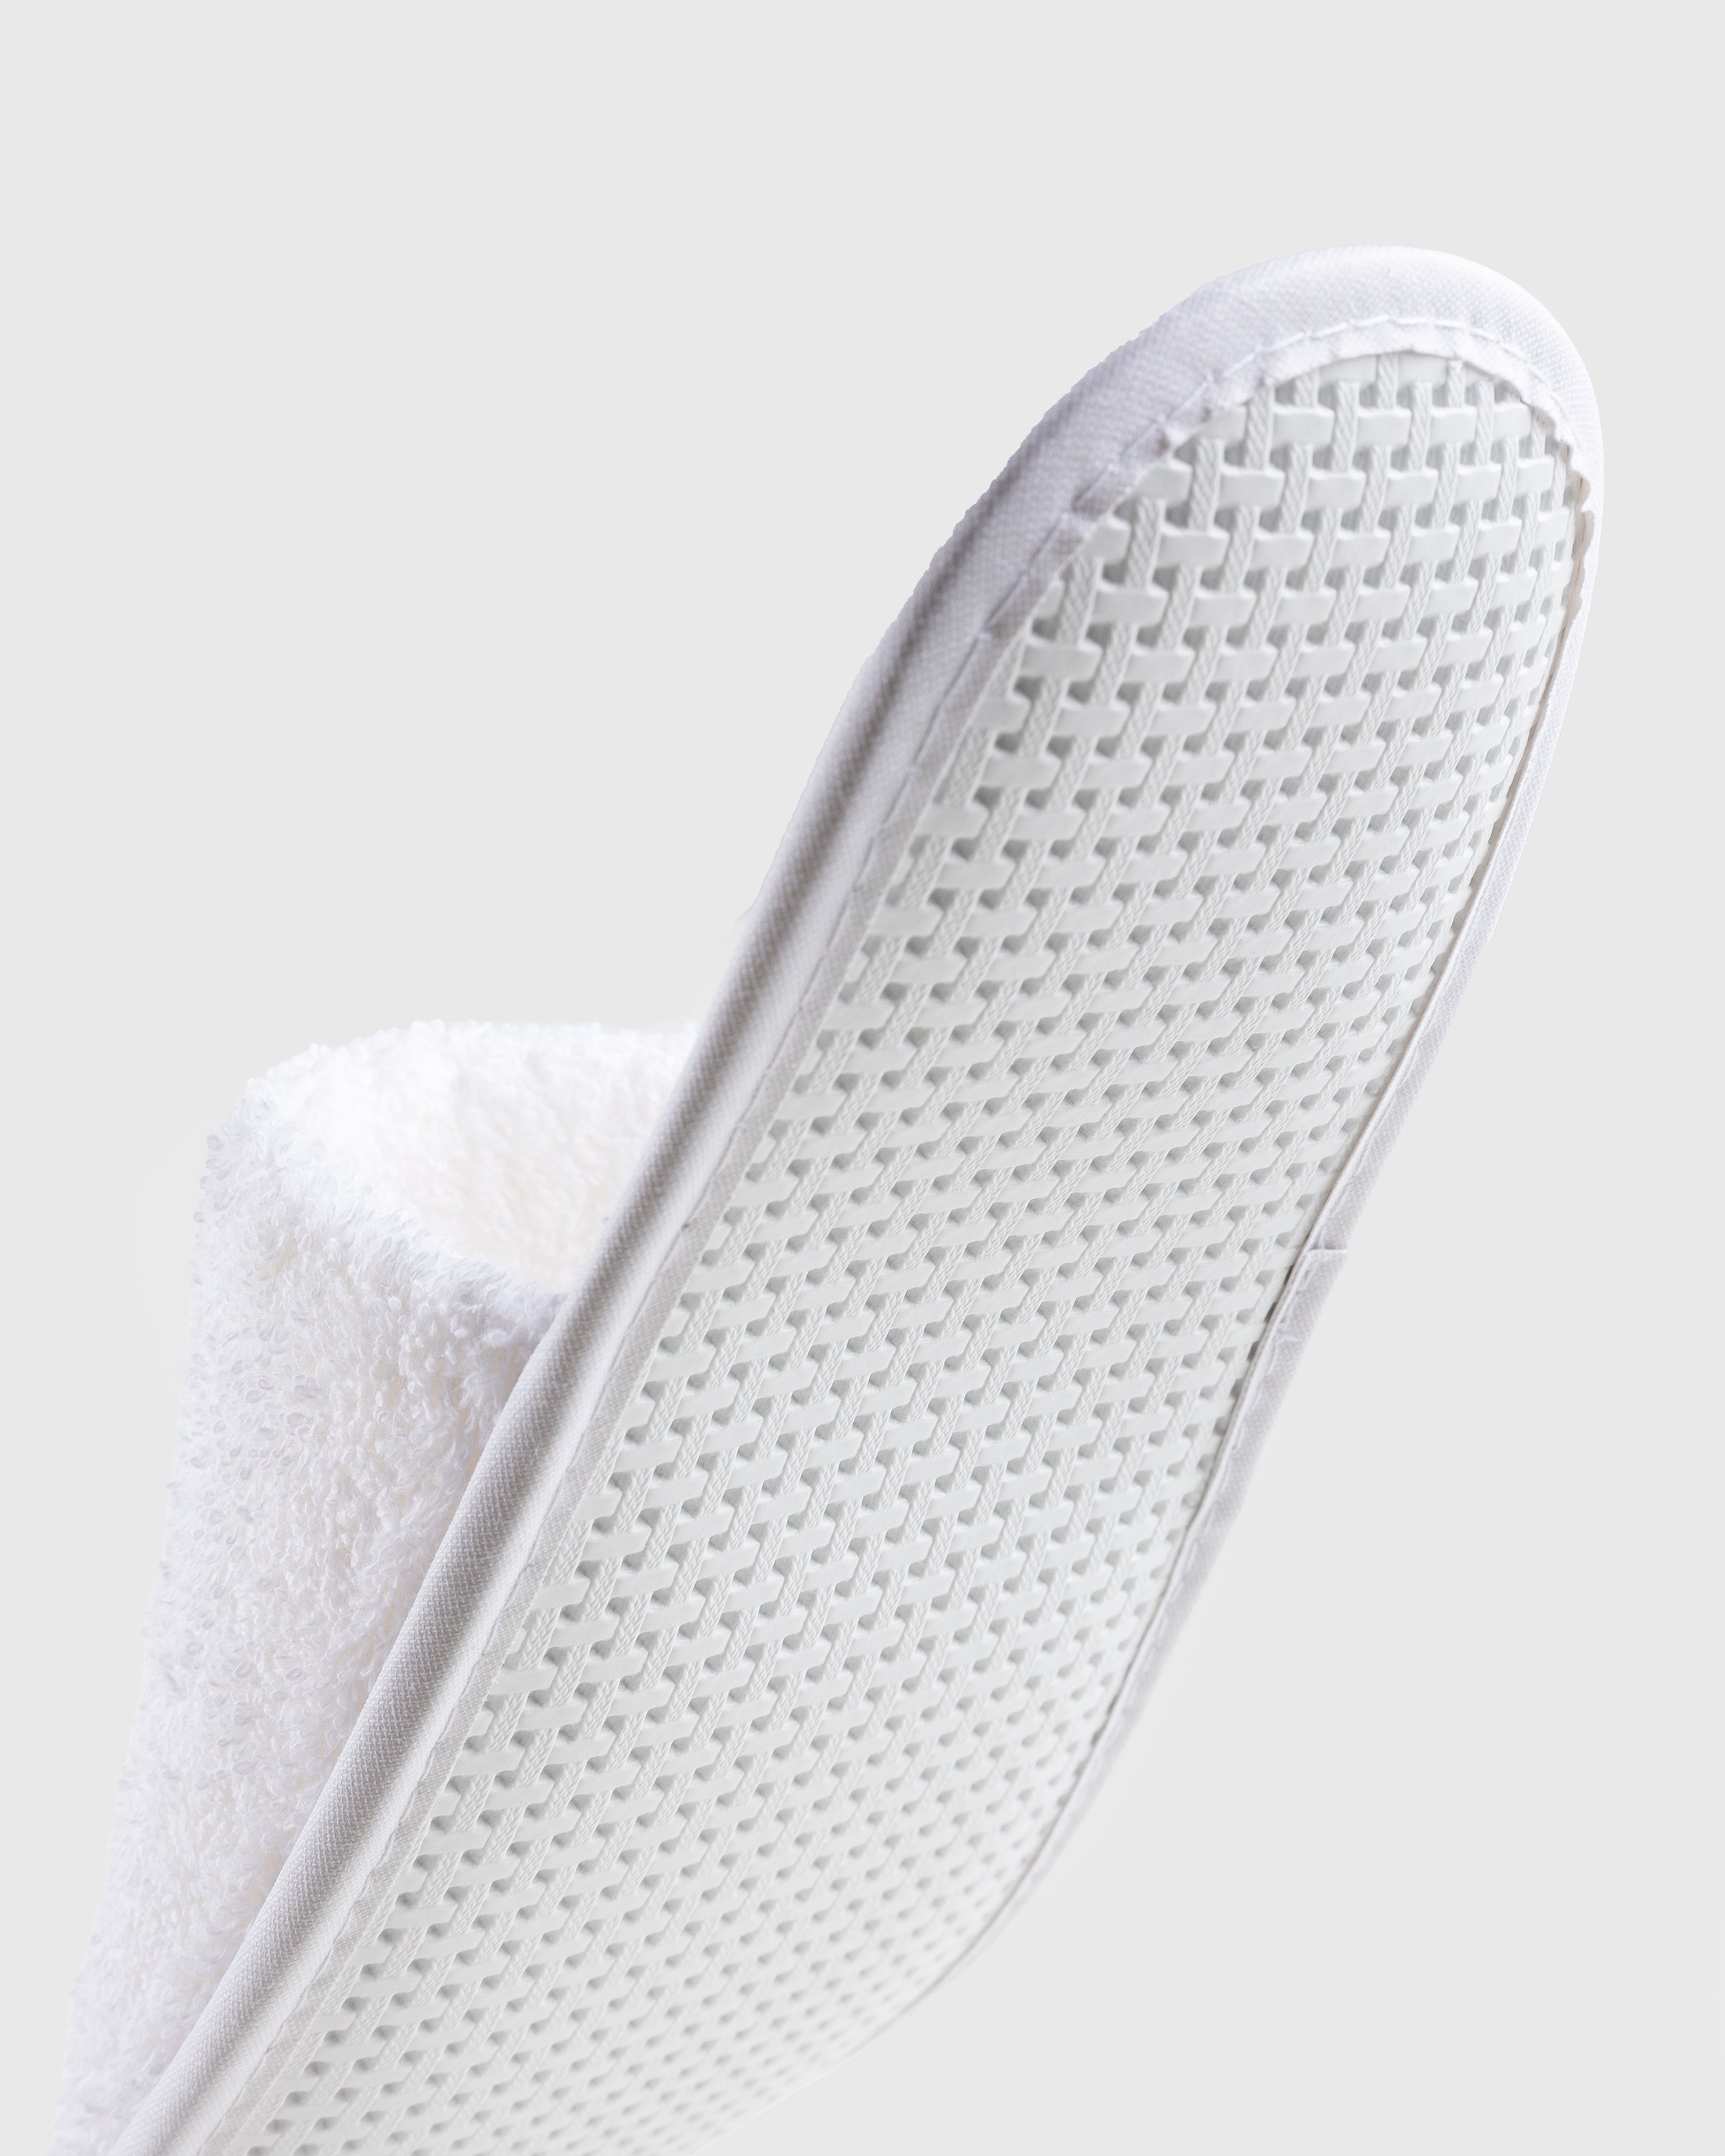 Hotel Amour x Highsnobiety – Not In Paris 4 Slippers White - Slippers - White - Image 6